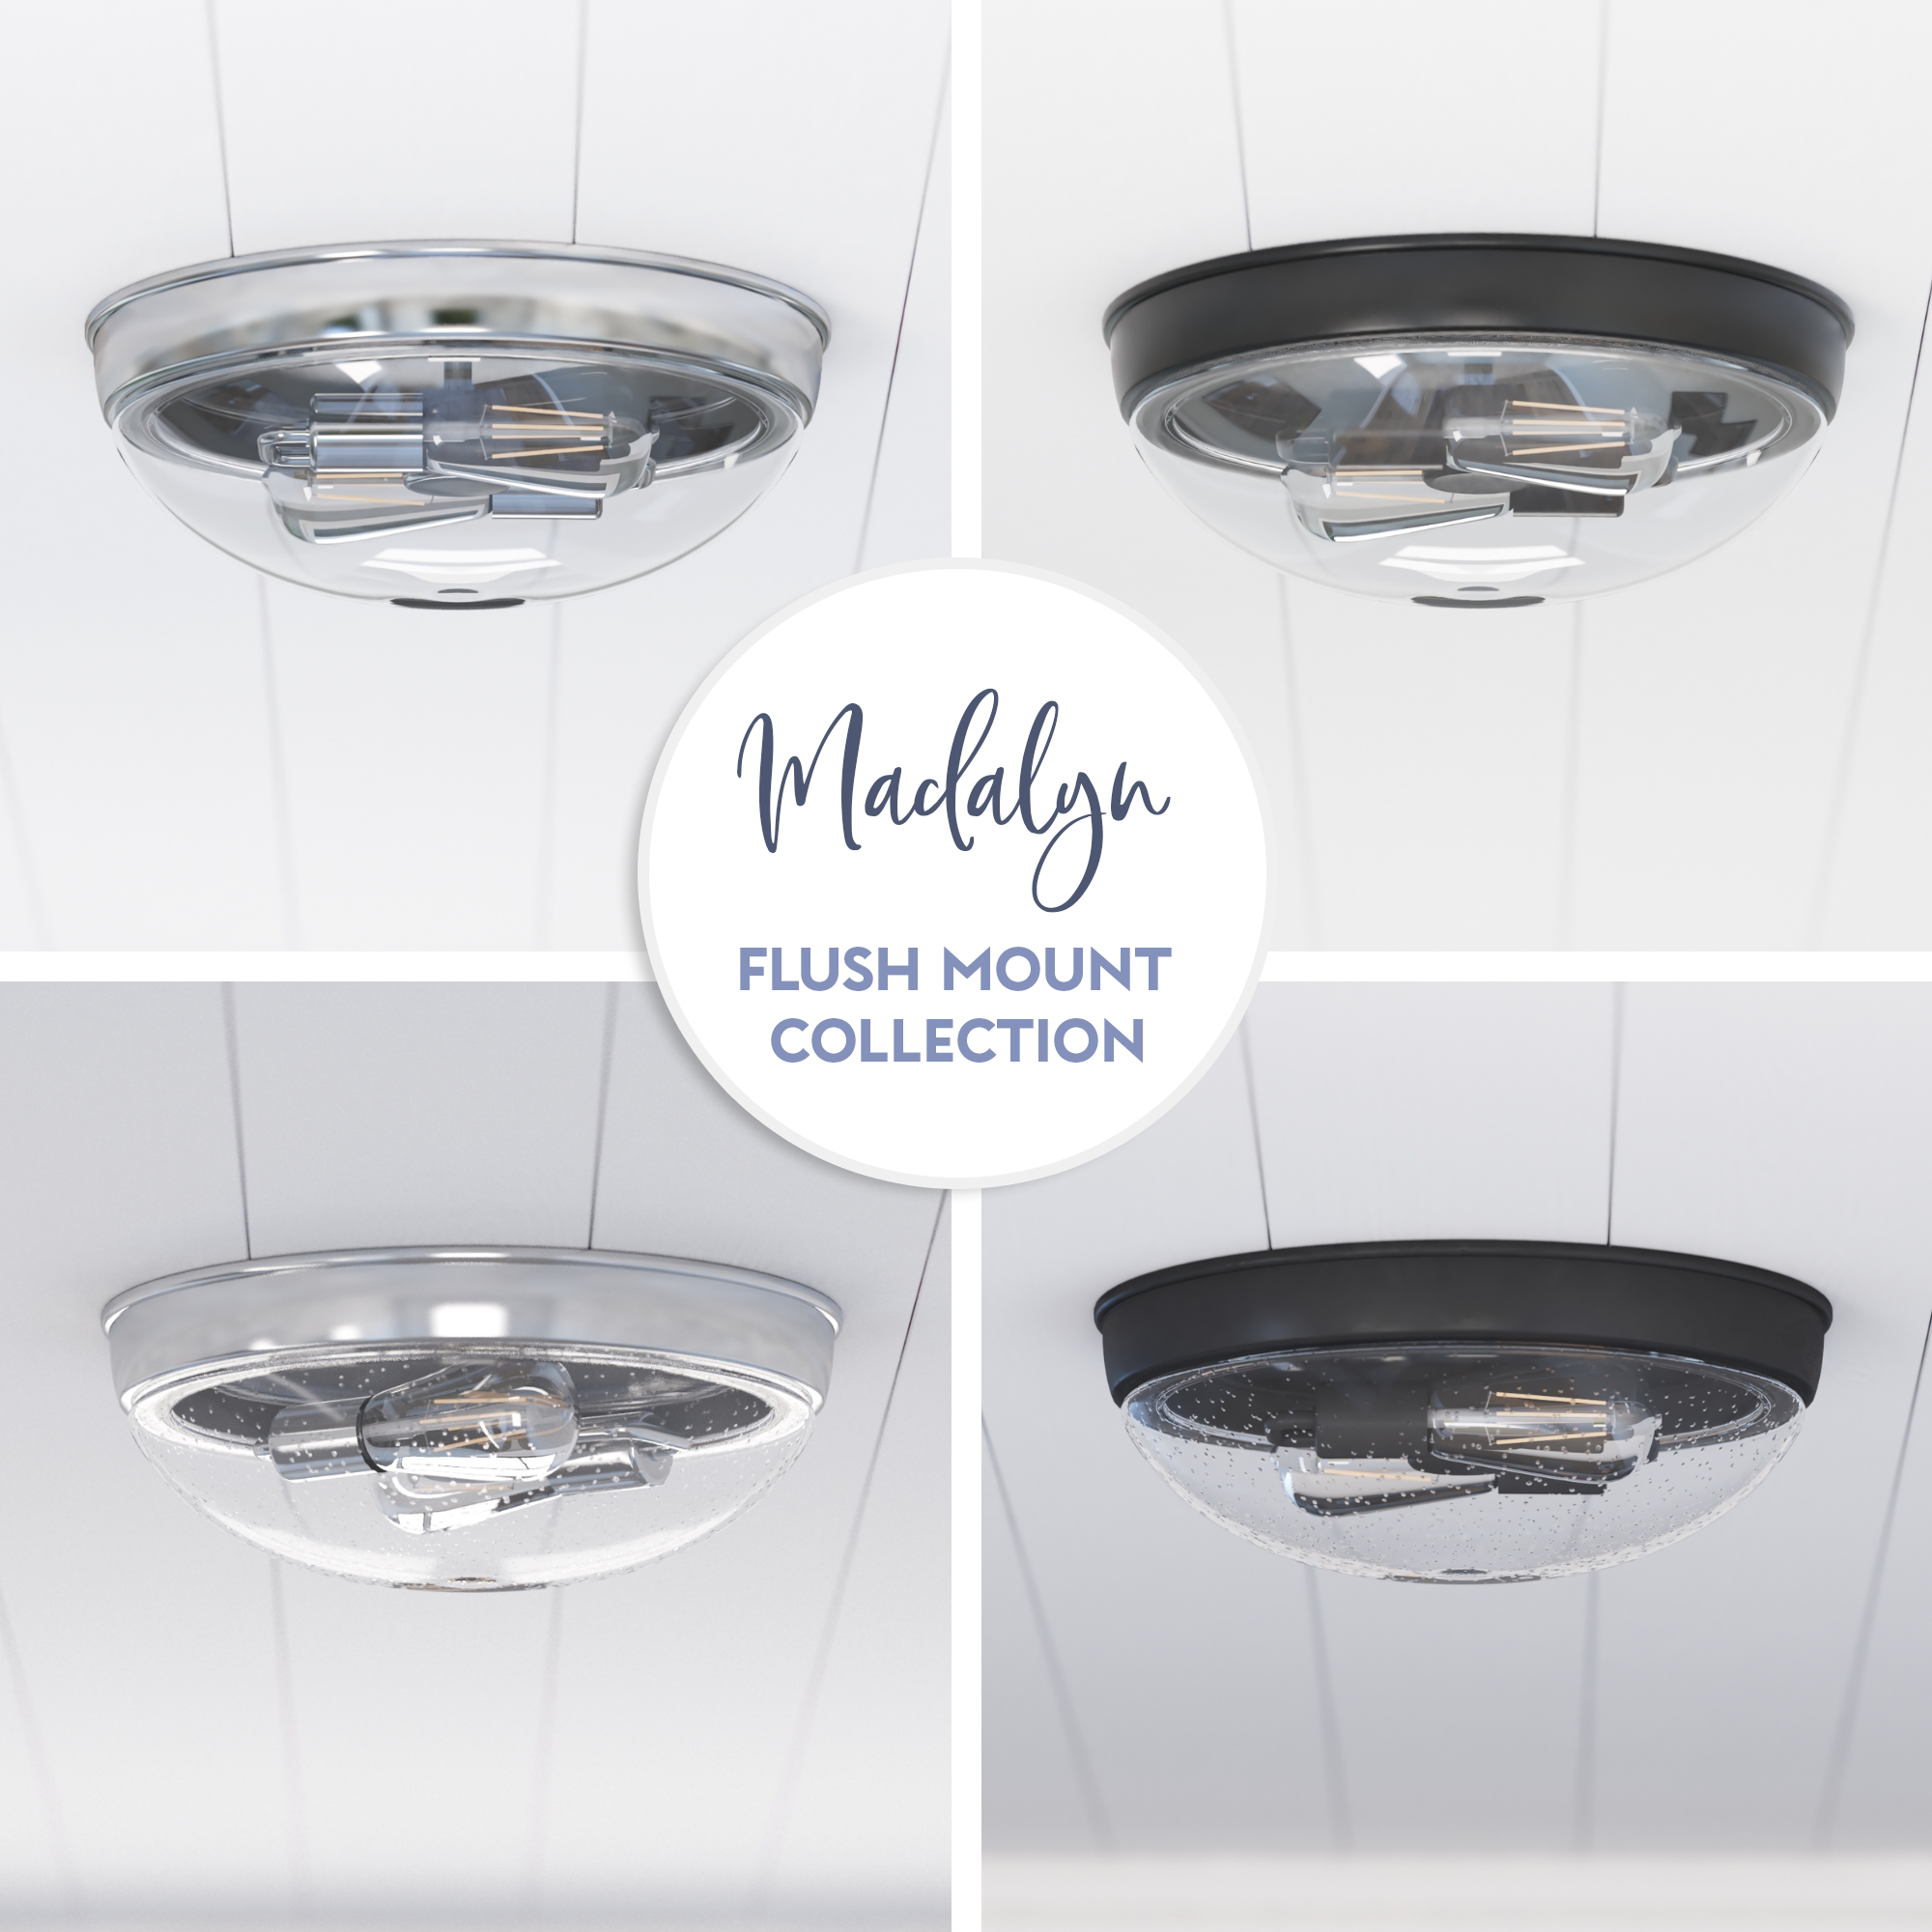 Madalyn, Dome Flushmount Light Fixture, Clear Glass, Brushed Nickel by Prominence Home